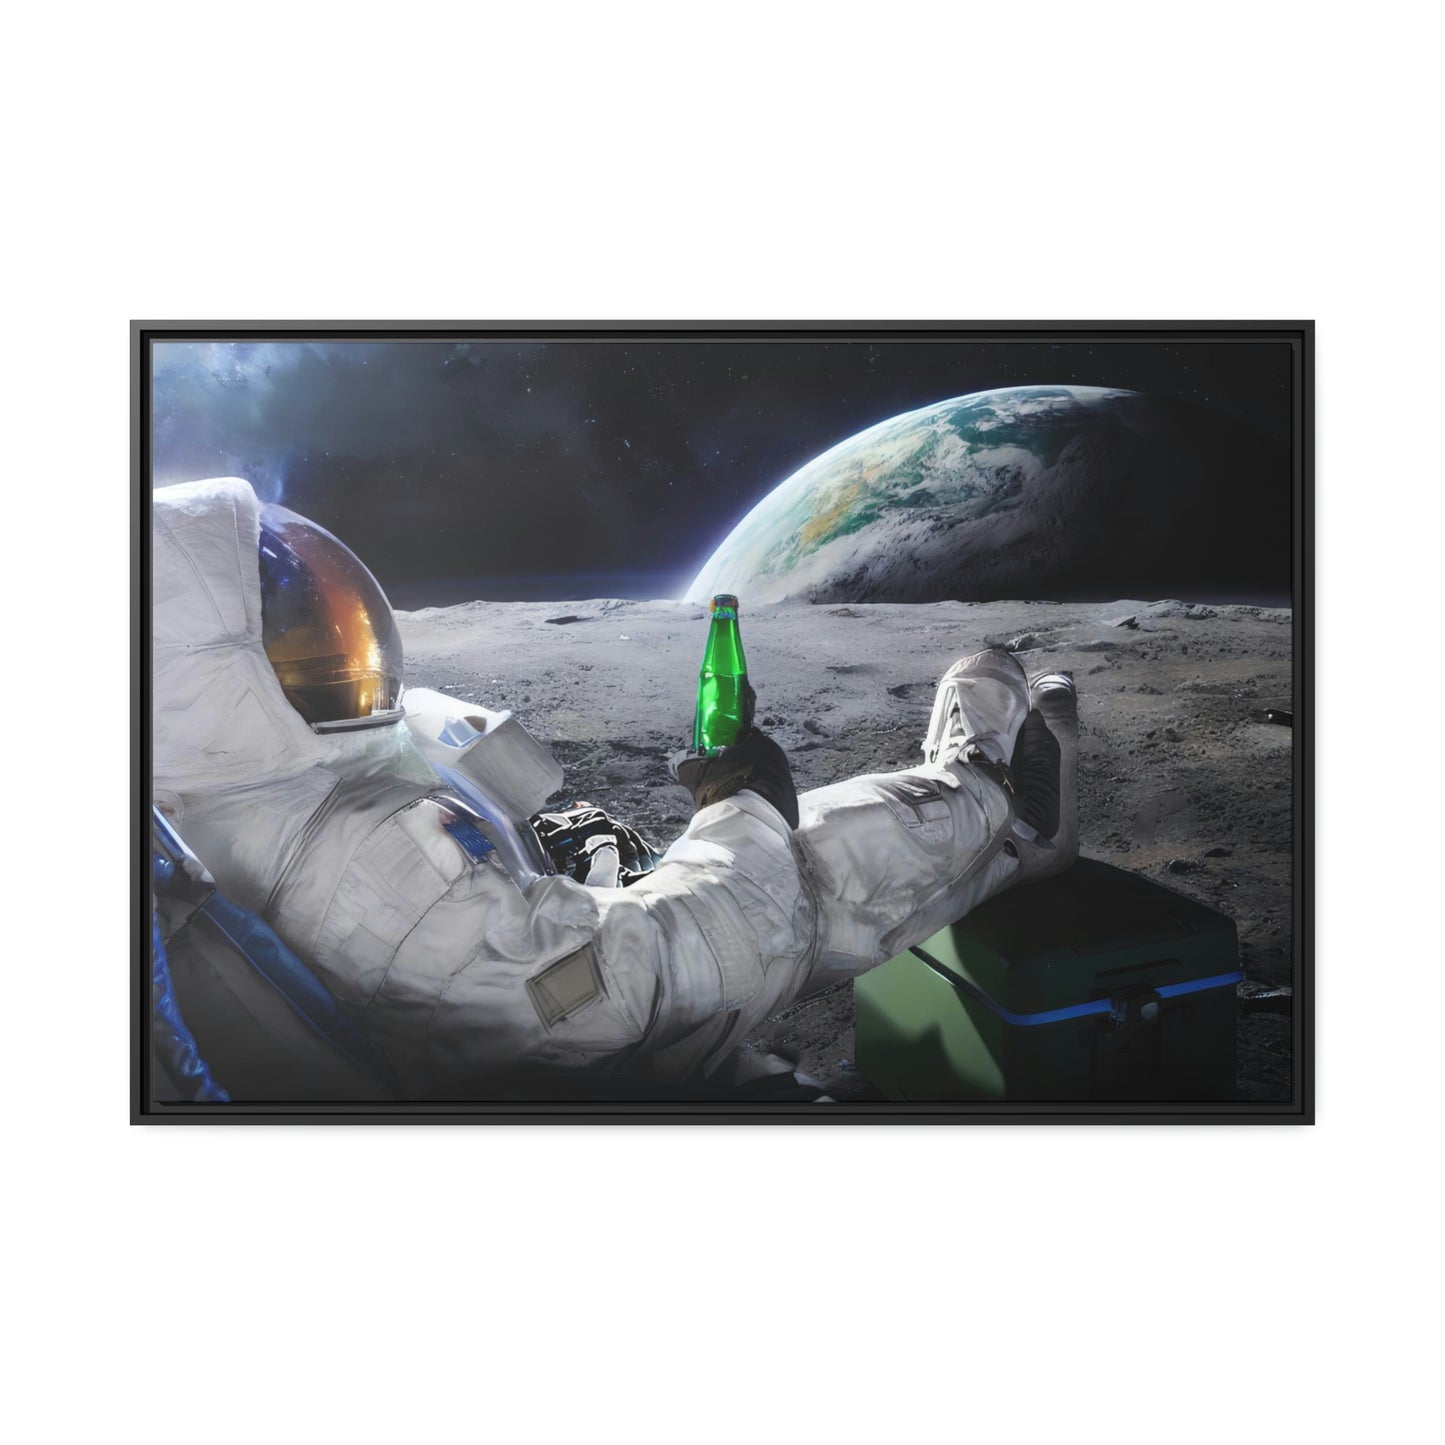 Cozy Astronaut From The Moon - Gallery Grade Canvas In Floater Frame